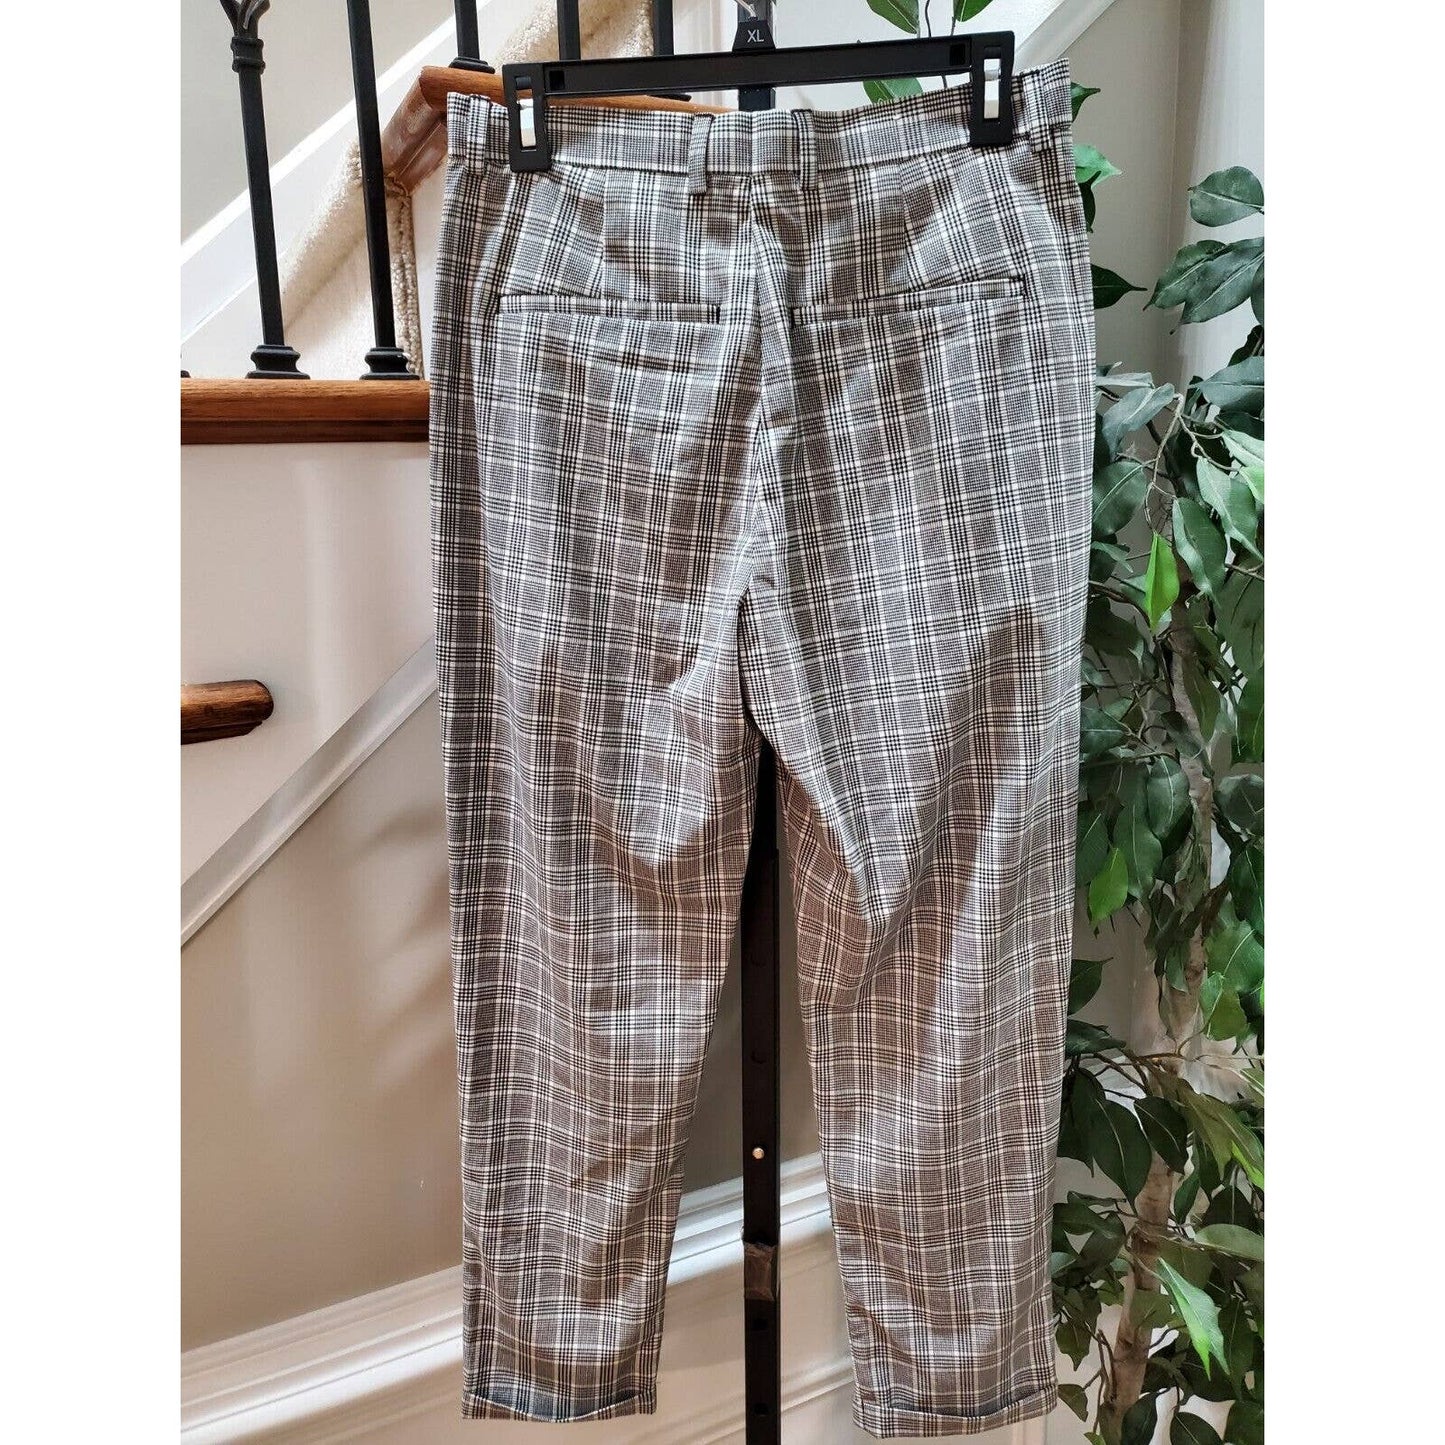 Zara Women's Gray Check Polyester Mid Rise Skinny Legs Casual Dress Pant Size 29